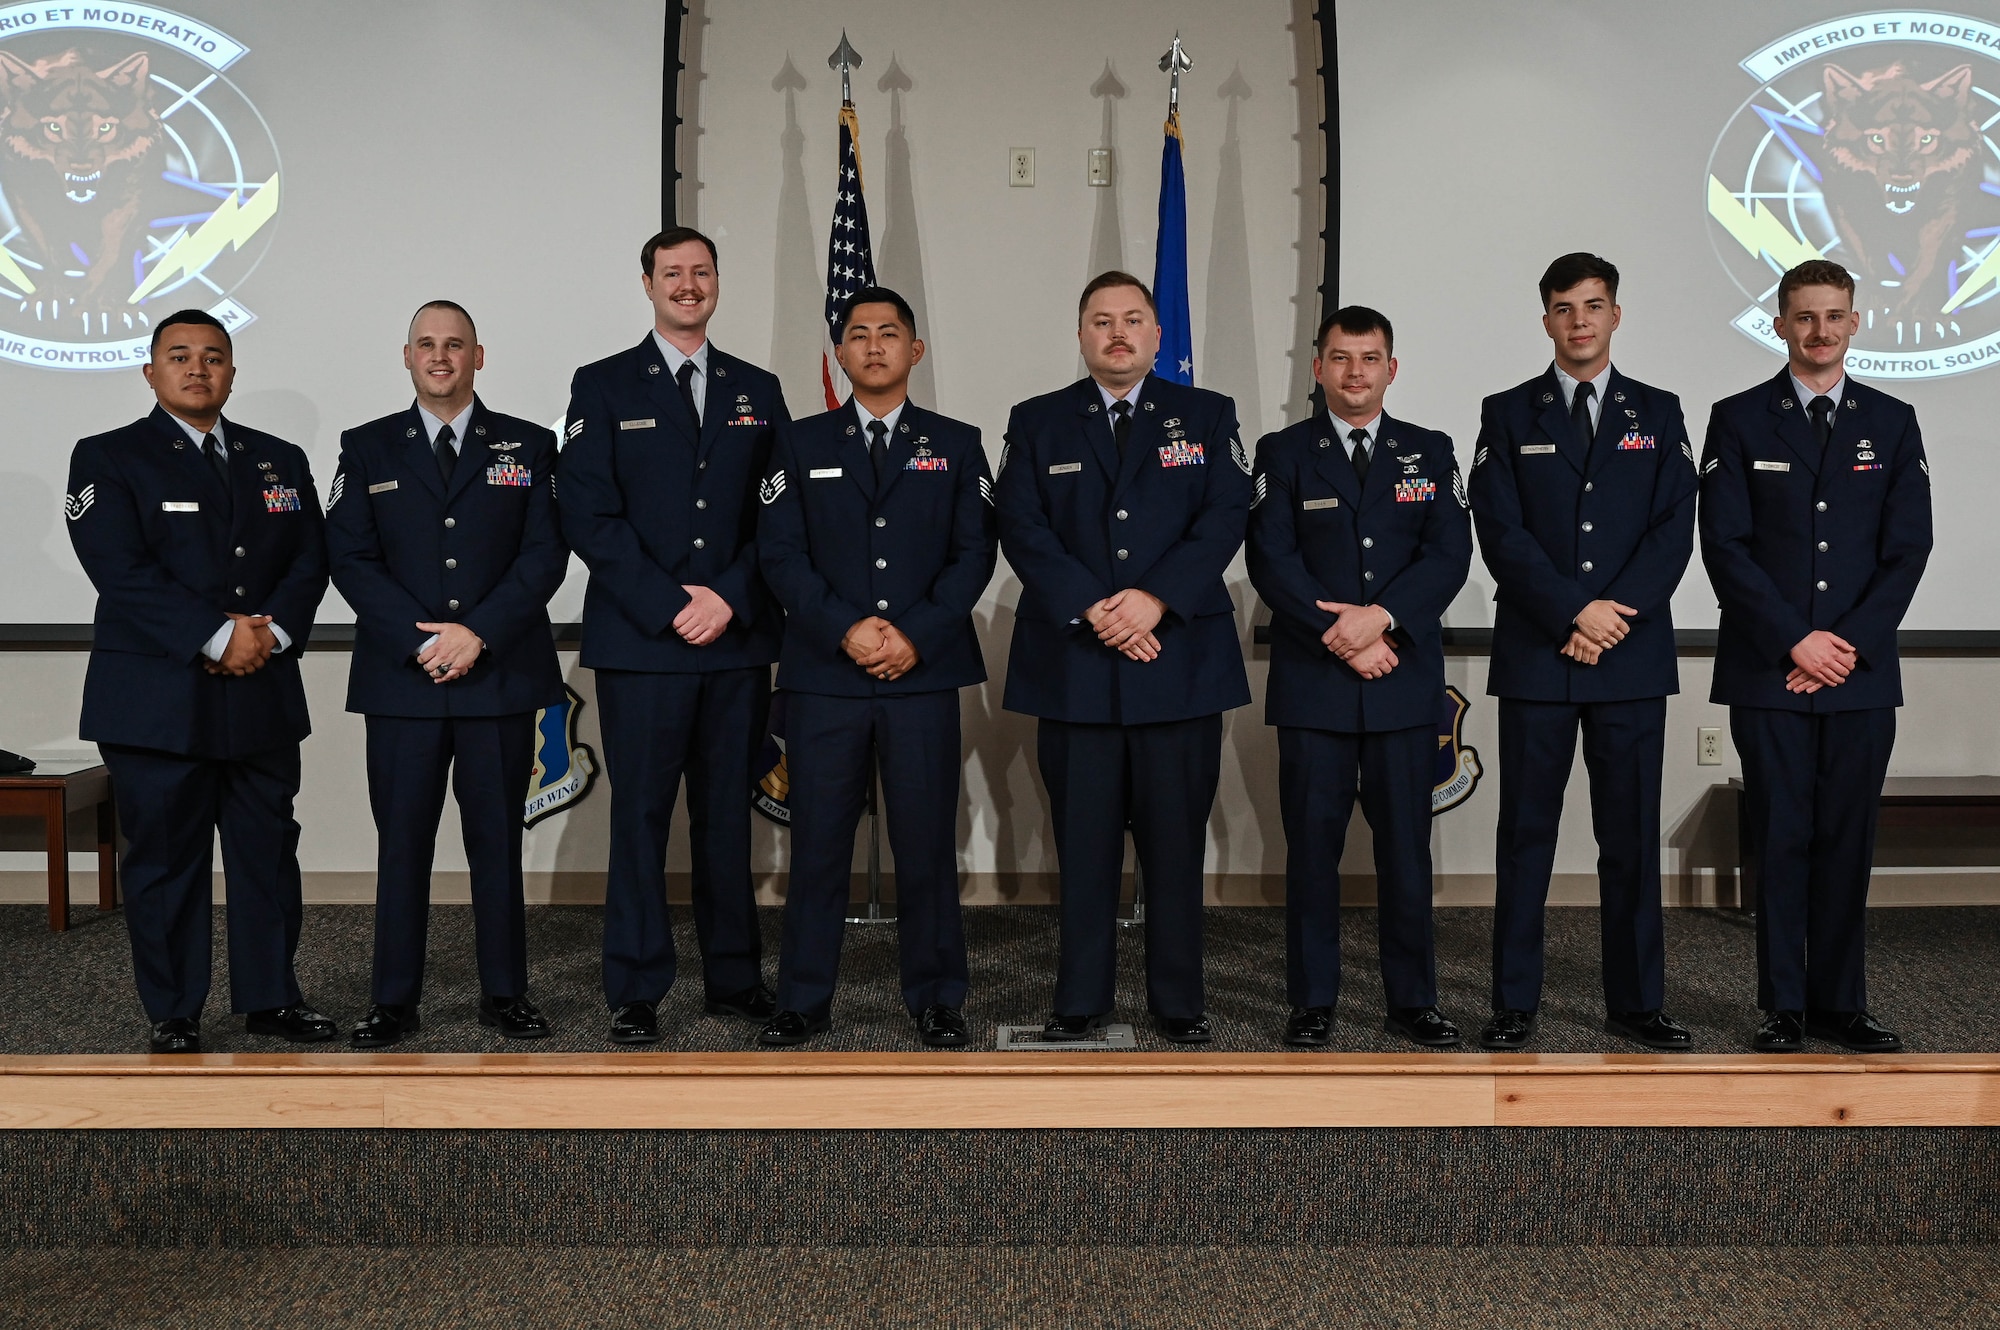 This was the first UWD course to graduate from the 337th Air Control Squadron in over 22 years.